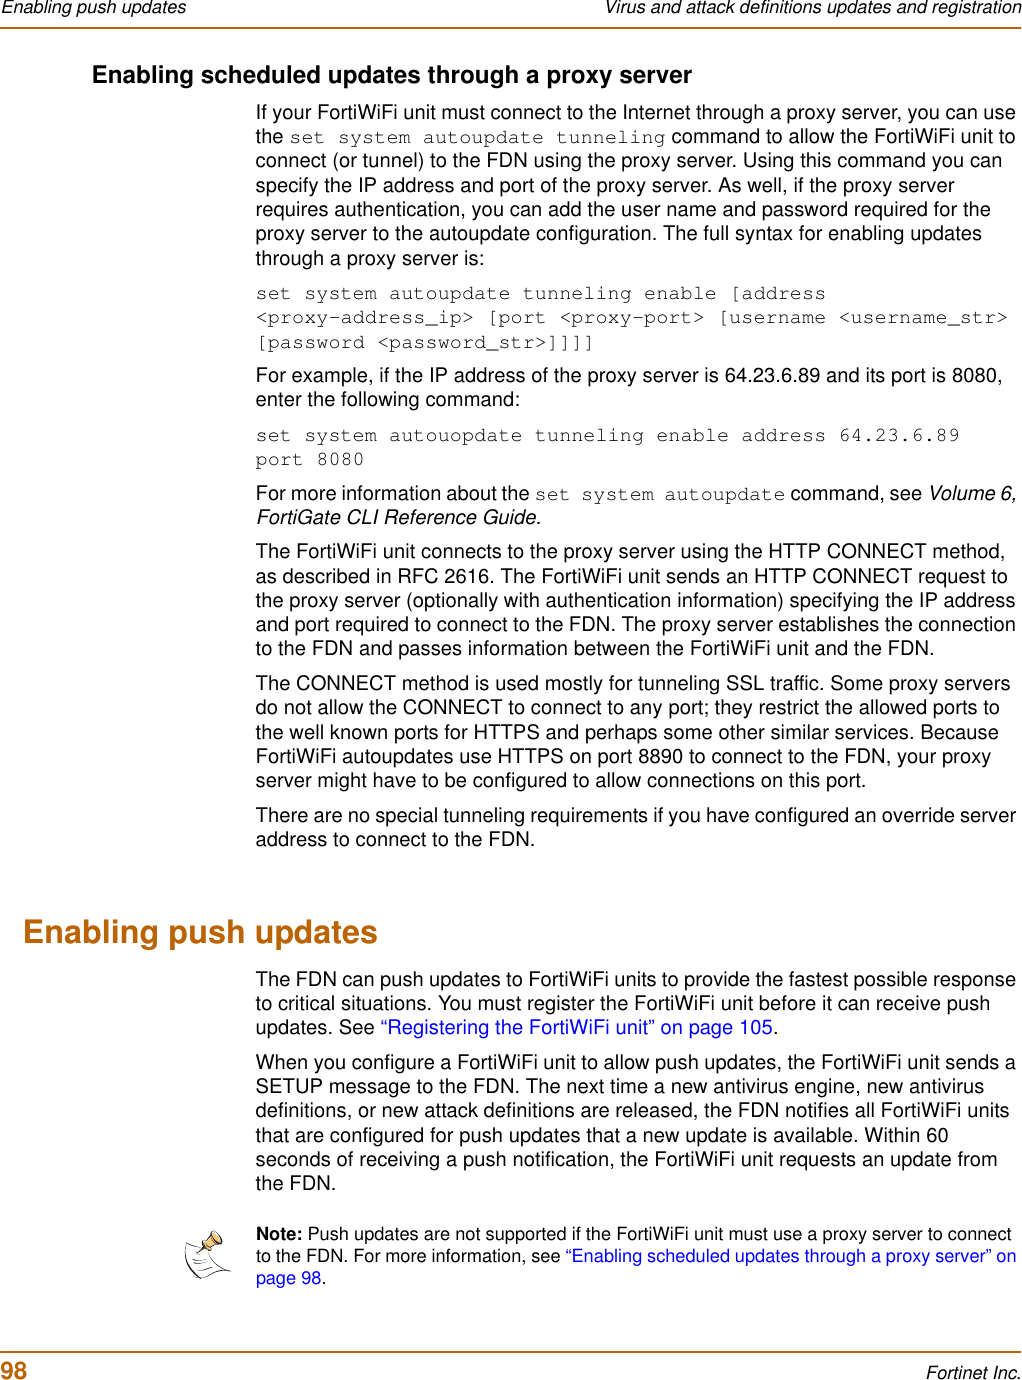 98 Fortinet Inc.Enabling push updates Virus and attack definitions updates and registrationEnabling scheduled updates through a proxy serverIf your FortiWiFi unit must connect to the Internet through a proxy server, you can use the set system autoupdate tunneling command to allow the FortiWiFi unit to connect (or tunnel) to the FDN using the proxy server. Using this command you can specify the IP address and port of the proxy server. As well, if the proxy server requires authentication, you can add the user name and password required for the proxy server to the autoupdate configuration. The full syntax for enabling updates through a proxy server is:set system autoupdate tunneling enable [address &lt;proxy-address_ip&gt; [port &lt;proxy-port&gt; [username &lt;username_str&gt; [password &lt;password_str&gt;]]]]For example, if the IP address of the proxy server is 64.23.6.89 and its port is 8080, enter the following command:set system autouopdate tunneling enable address 64.23.6.89 port 8080For more information about the set system autoupdate command, see Volume 6, FortiGate CLI Reference Guide.The FortiWiFi unit connects to the proxy server using the HTTP CONNECT method, as described in RFC 2616. The FortiWiFi unit sends an HTTP CONNECT request to the proxy server (optionally with authentication information) specifying the IP address and port required to connect to the FDN. The proxy server establishes the connection to the FDN and passes information between the FortiWiFi unit and the FDN.The CONNECT method is used mostly for tunneling SSL traffic. Some proxy servers do not allow the CONNECT to connect to any port; they restrict the allowed ports to the well known ports for HTTPS and perhaps some other similar services. Because FortiWiFi autoupdates use HTTPS on port 8890 to connect to the FDN, your proxy server might have to be configured to allow connections on this port.There are no special tunneling requirements if you have configured an override server address to connect to the FDN.Enabling push updatesThe FDN can push updates to FortiWiFi units to provide the fastest possible response to critical situations. You must register the FortiWiFi unit before it can receive push updates. See “Registering the FortiWiFi unit” on page 105.When you configure a FortiWiFi unit to allow push updates, the FortiWiFi unit sends a SETUP message to the FDN. The next time a new antivirus engine, new antivirus definitions, or new attack definitions are released, the FDN notifies all FortiWiFi units that are configured for push updates that a new update is available. Within 60 seconds of receiving a push notification, the FortiWiFi unit requests an update from the FDN.Note: Push updates are not supported if the FortiWiFi unit must use a proxy server to connect to the FDN. For more information, see “Enabling scheduled updates through a proxy server” on page 98.